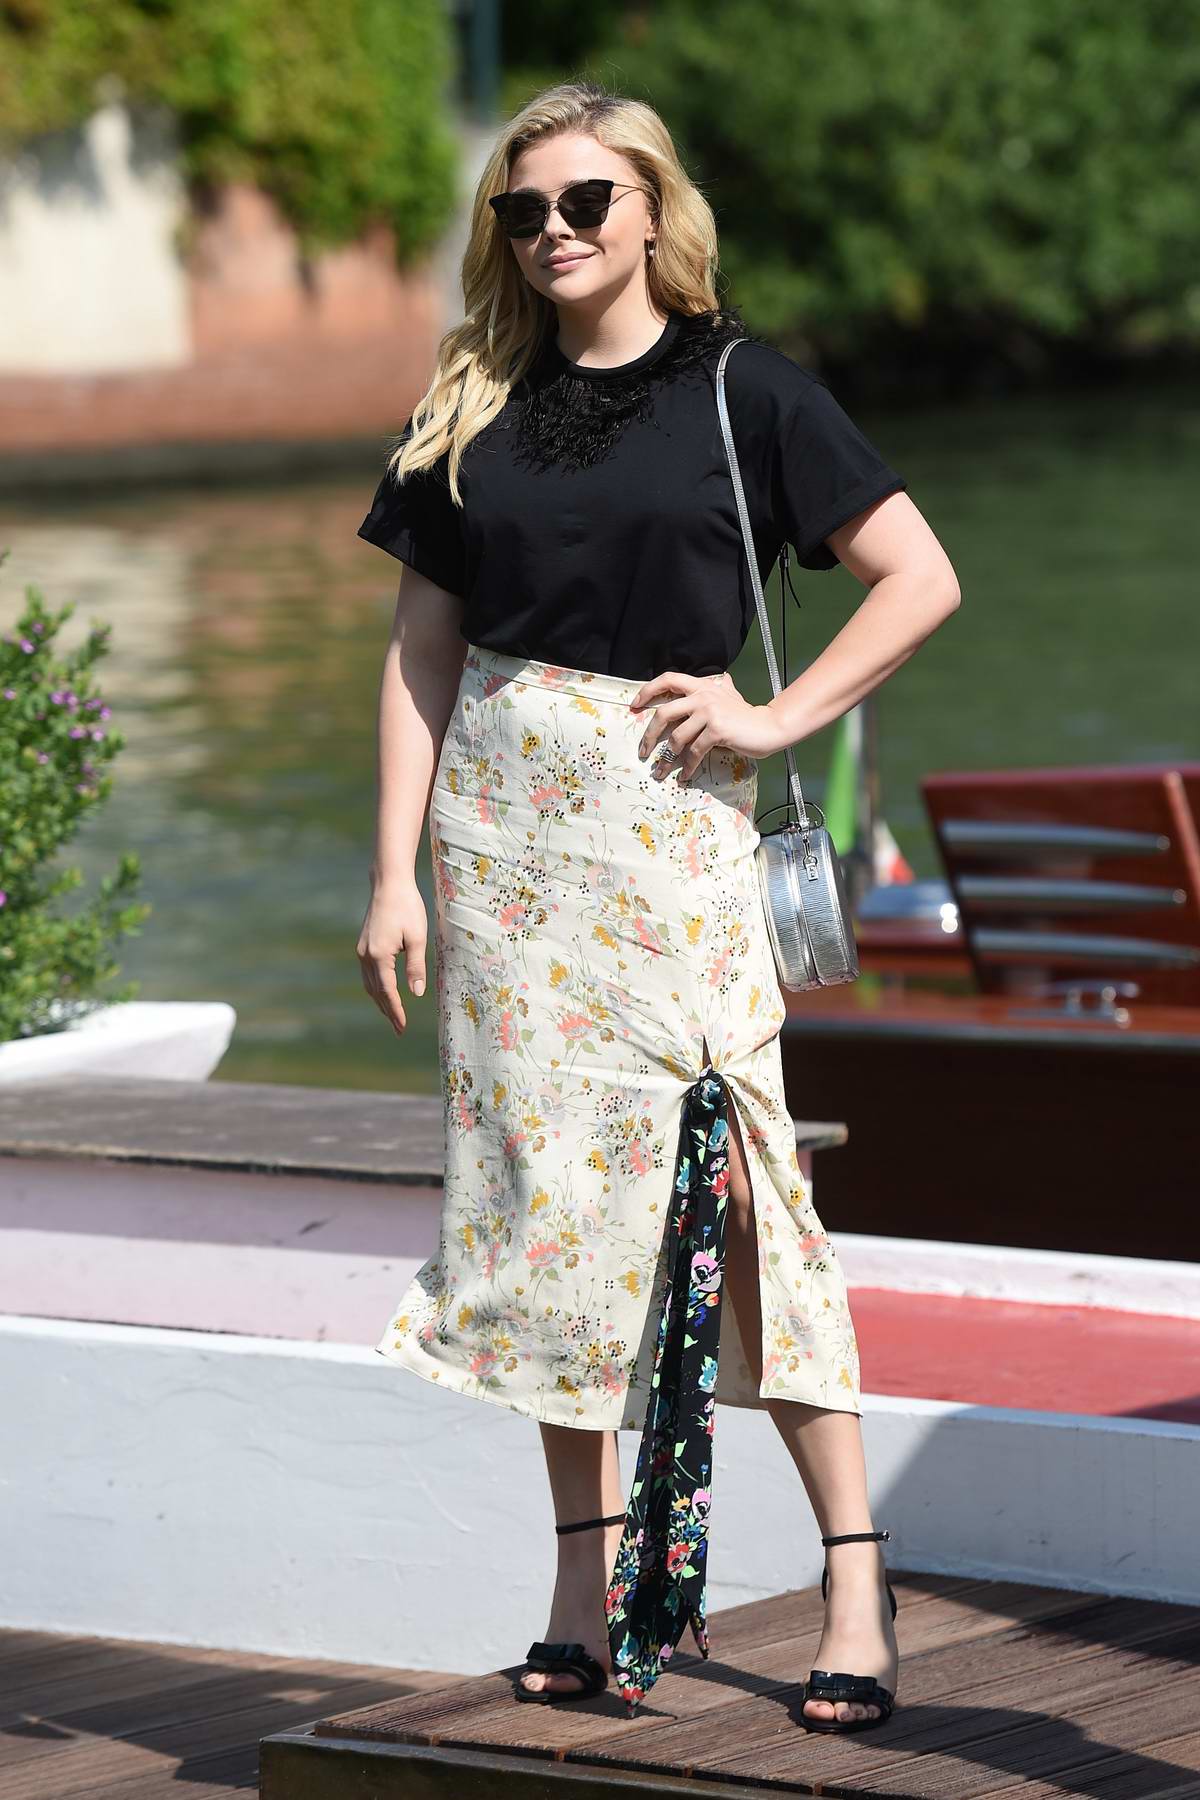 Chloe Grace Moretz spotted in a black top with a floral print